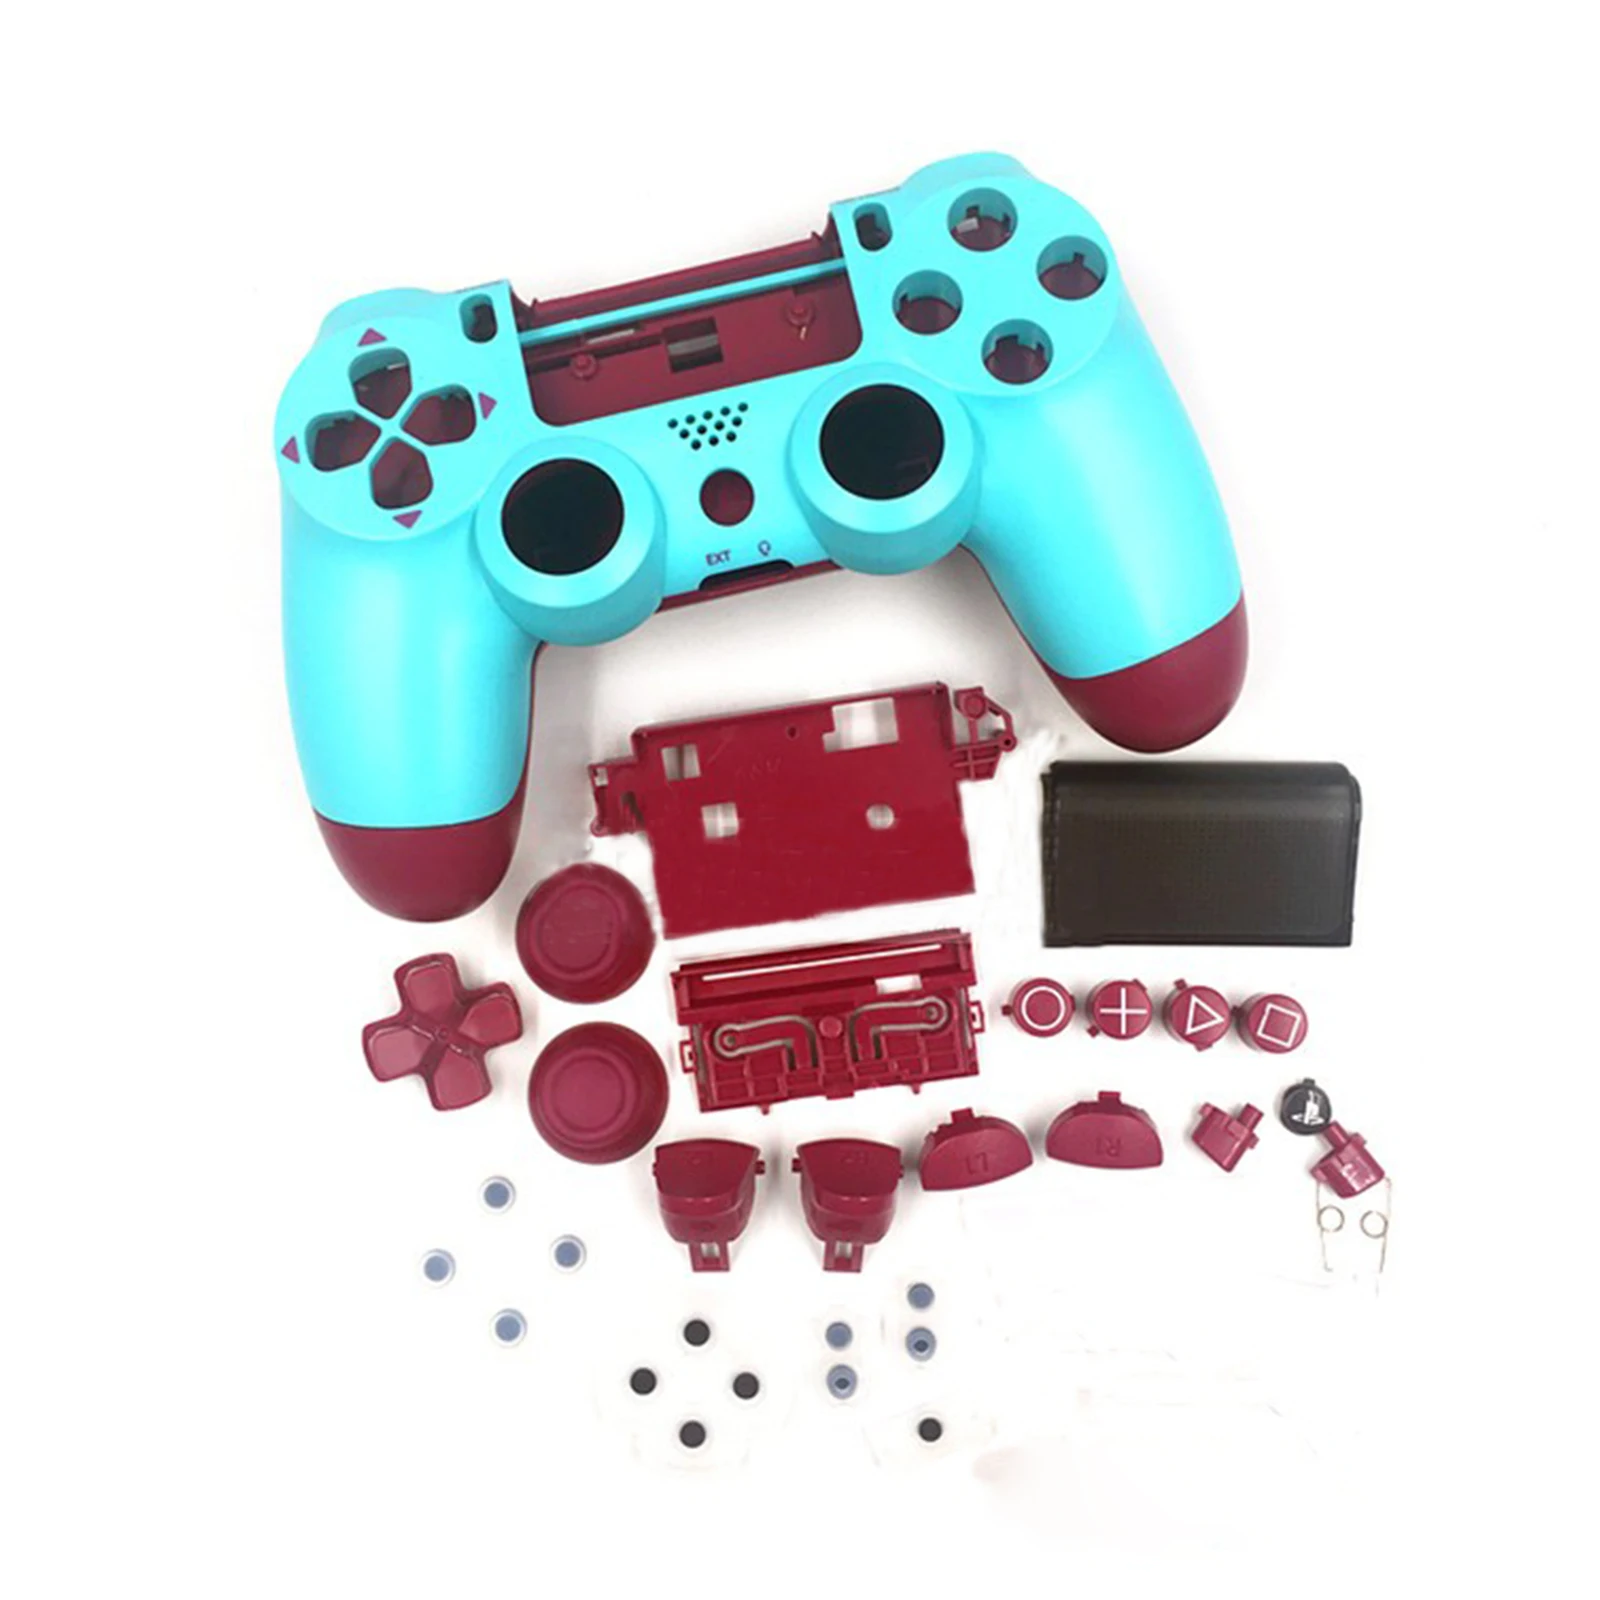 

Replacement Housing Shell Case Cover for Sony Playstation 4 PS4 Game Controller Handle Gamepad Buttons DIY Mod Kit Accessories